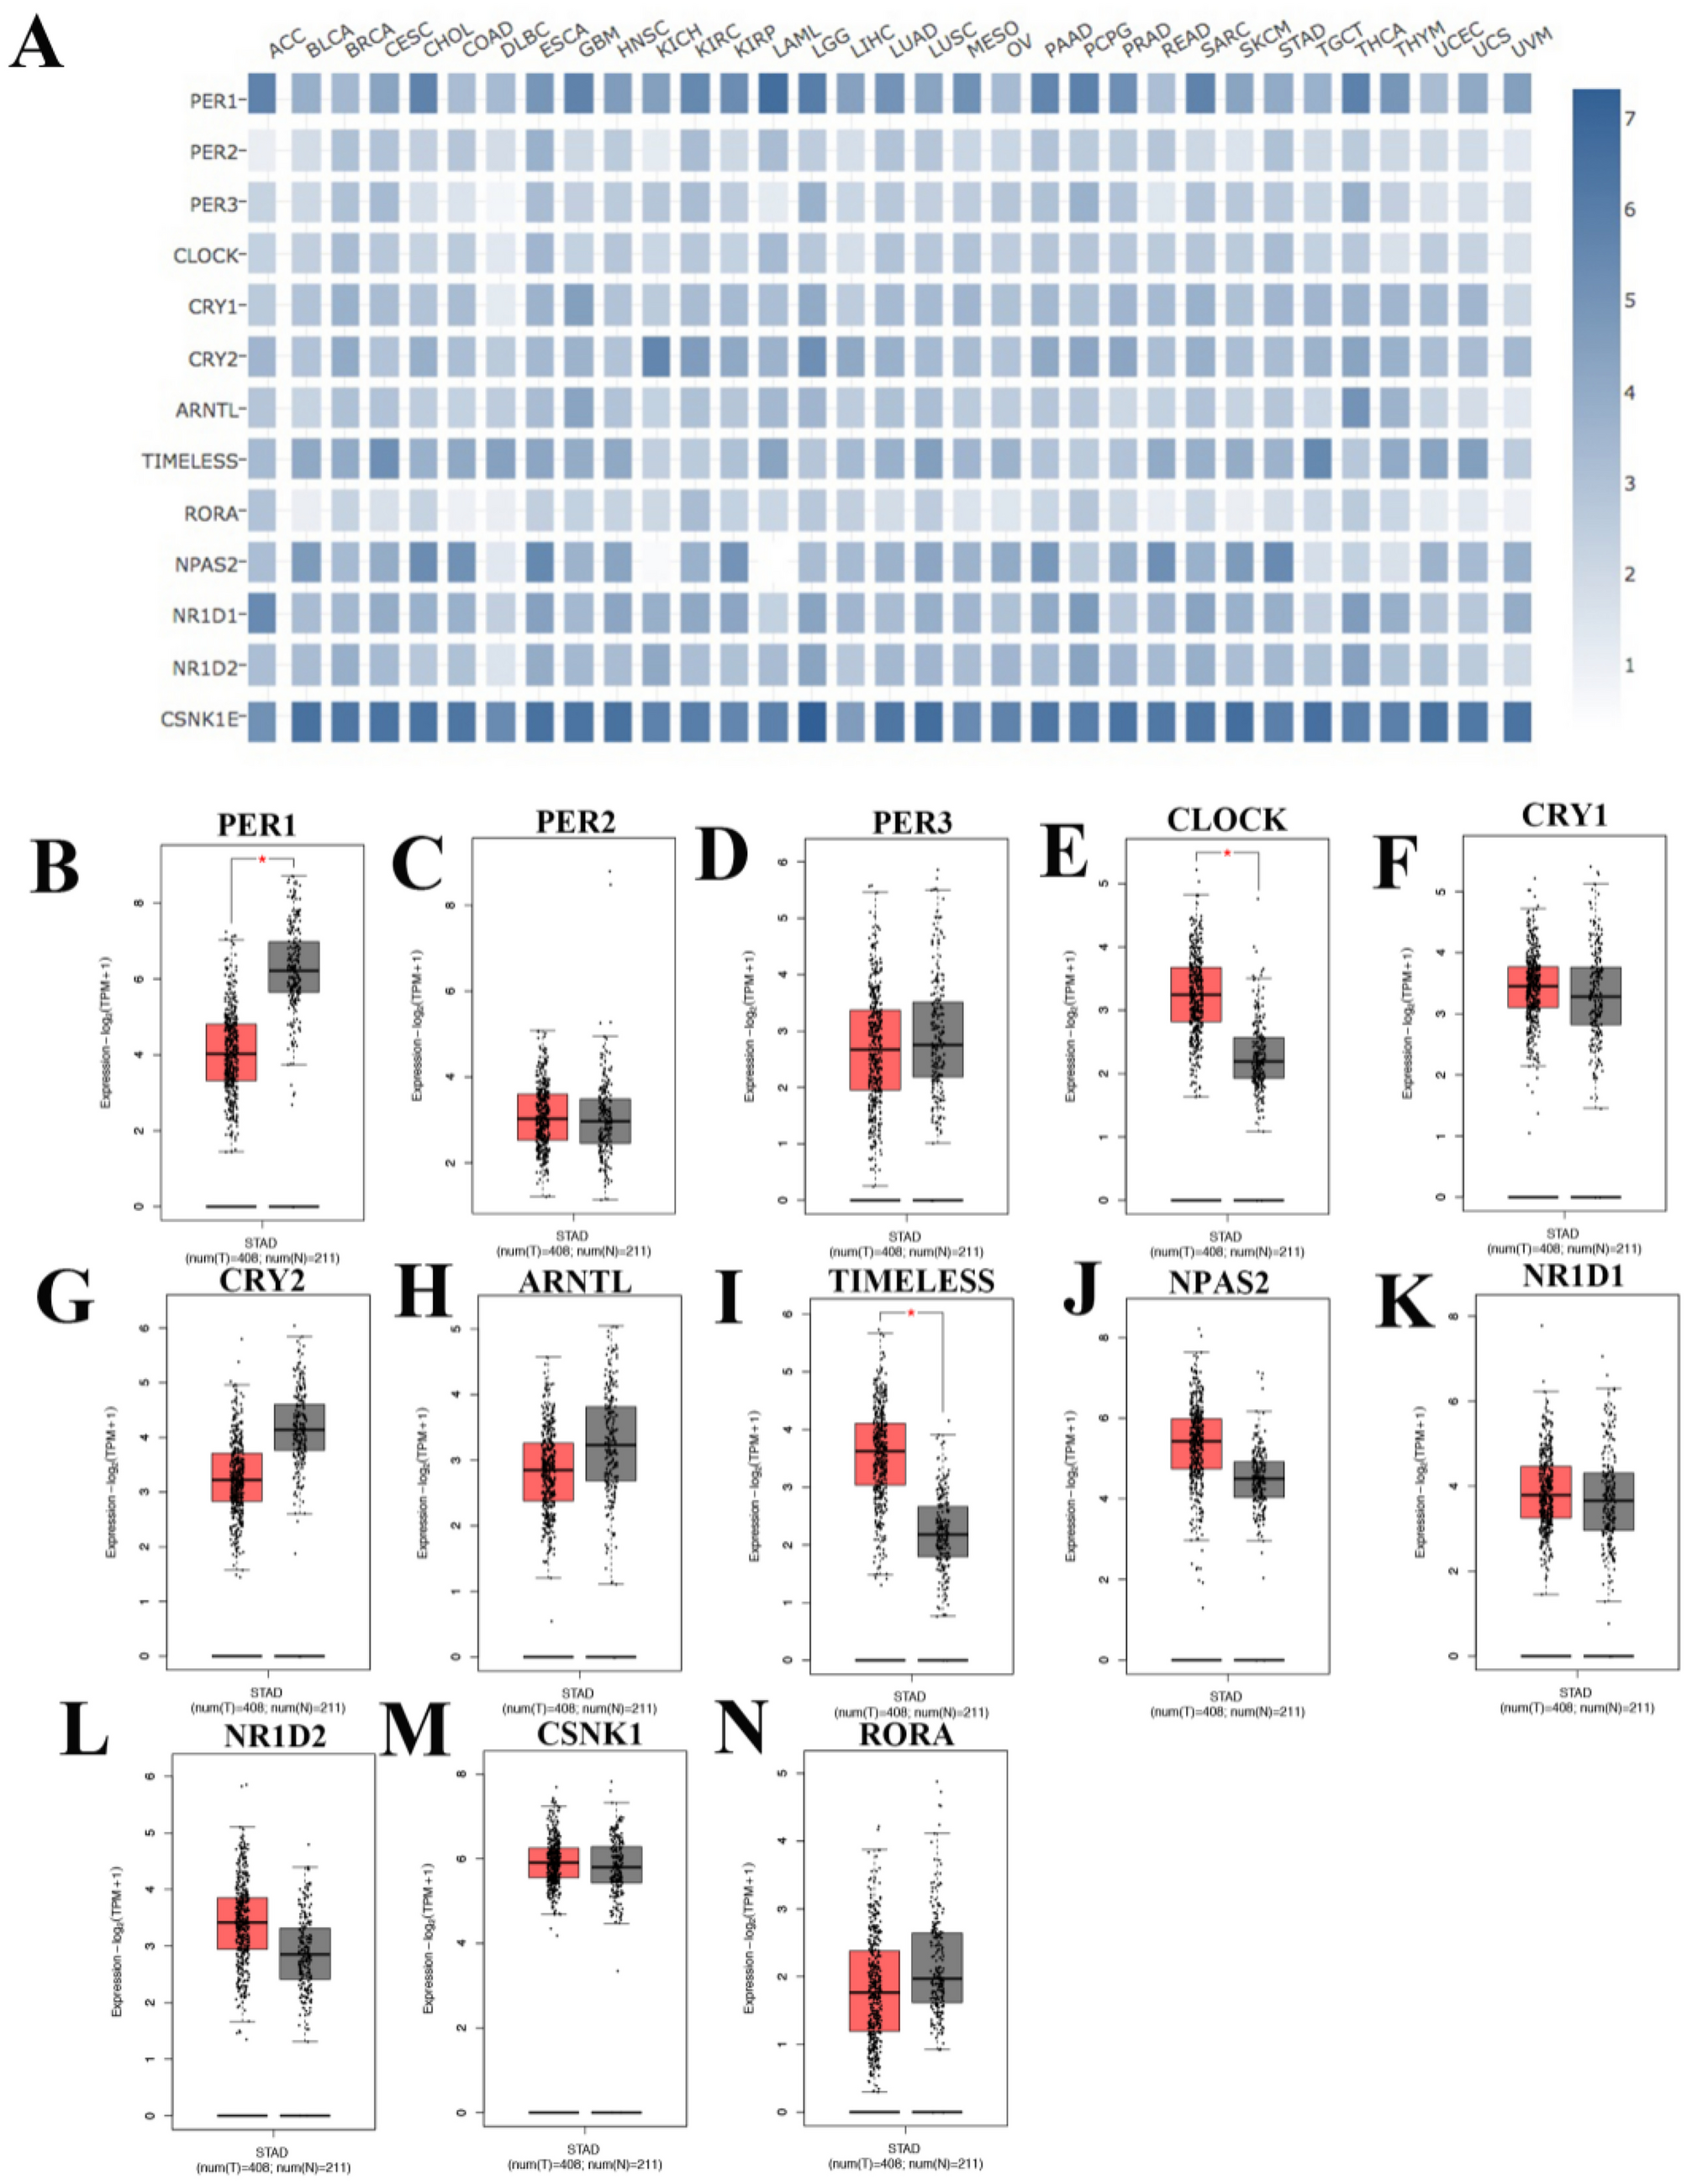 Biological Clock Genes are Crucial and Promising Biomarkers for the Therapeutic Targets and Prognostic Assessment in Gastric Cancer